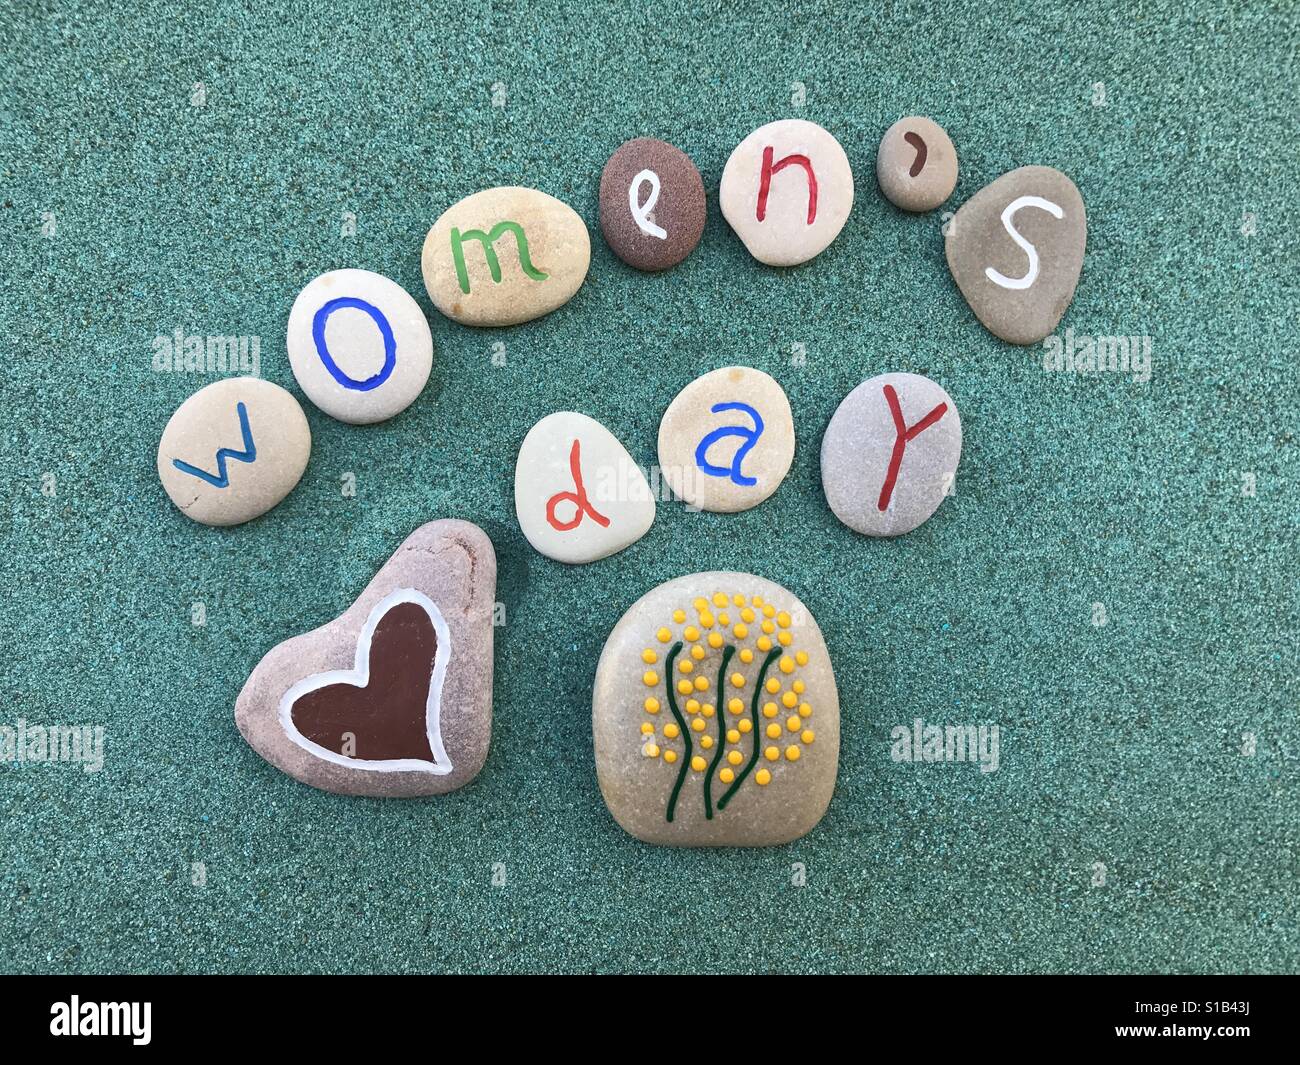 8 March, Women's Day, conceptual stones composition Stock Photo